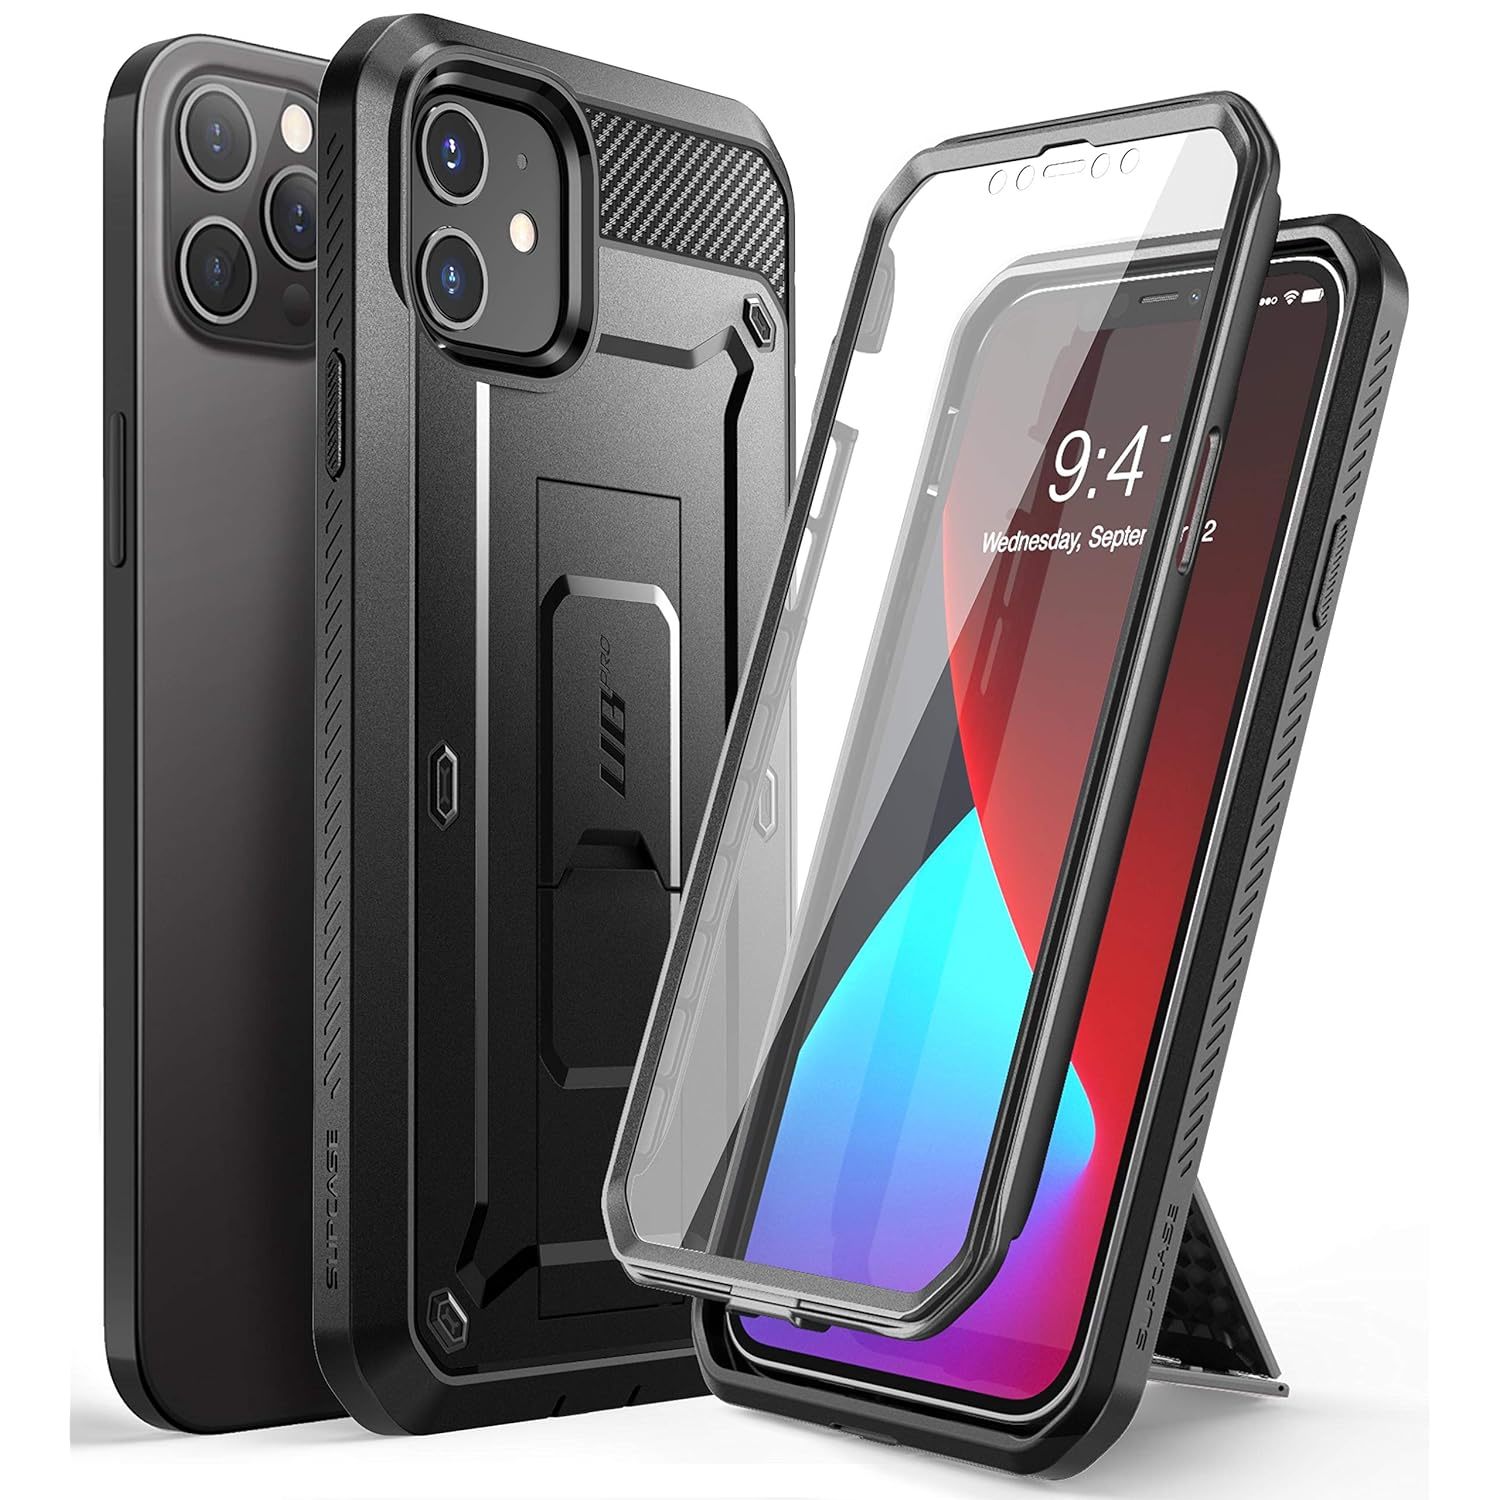 Primary image for SupCase Unicorn Beetle Pro Series Case for iPhone 12 /12 Pro (2020 Release) 6.1 